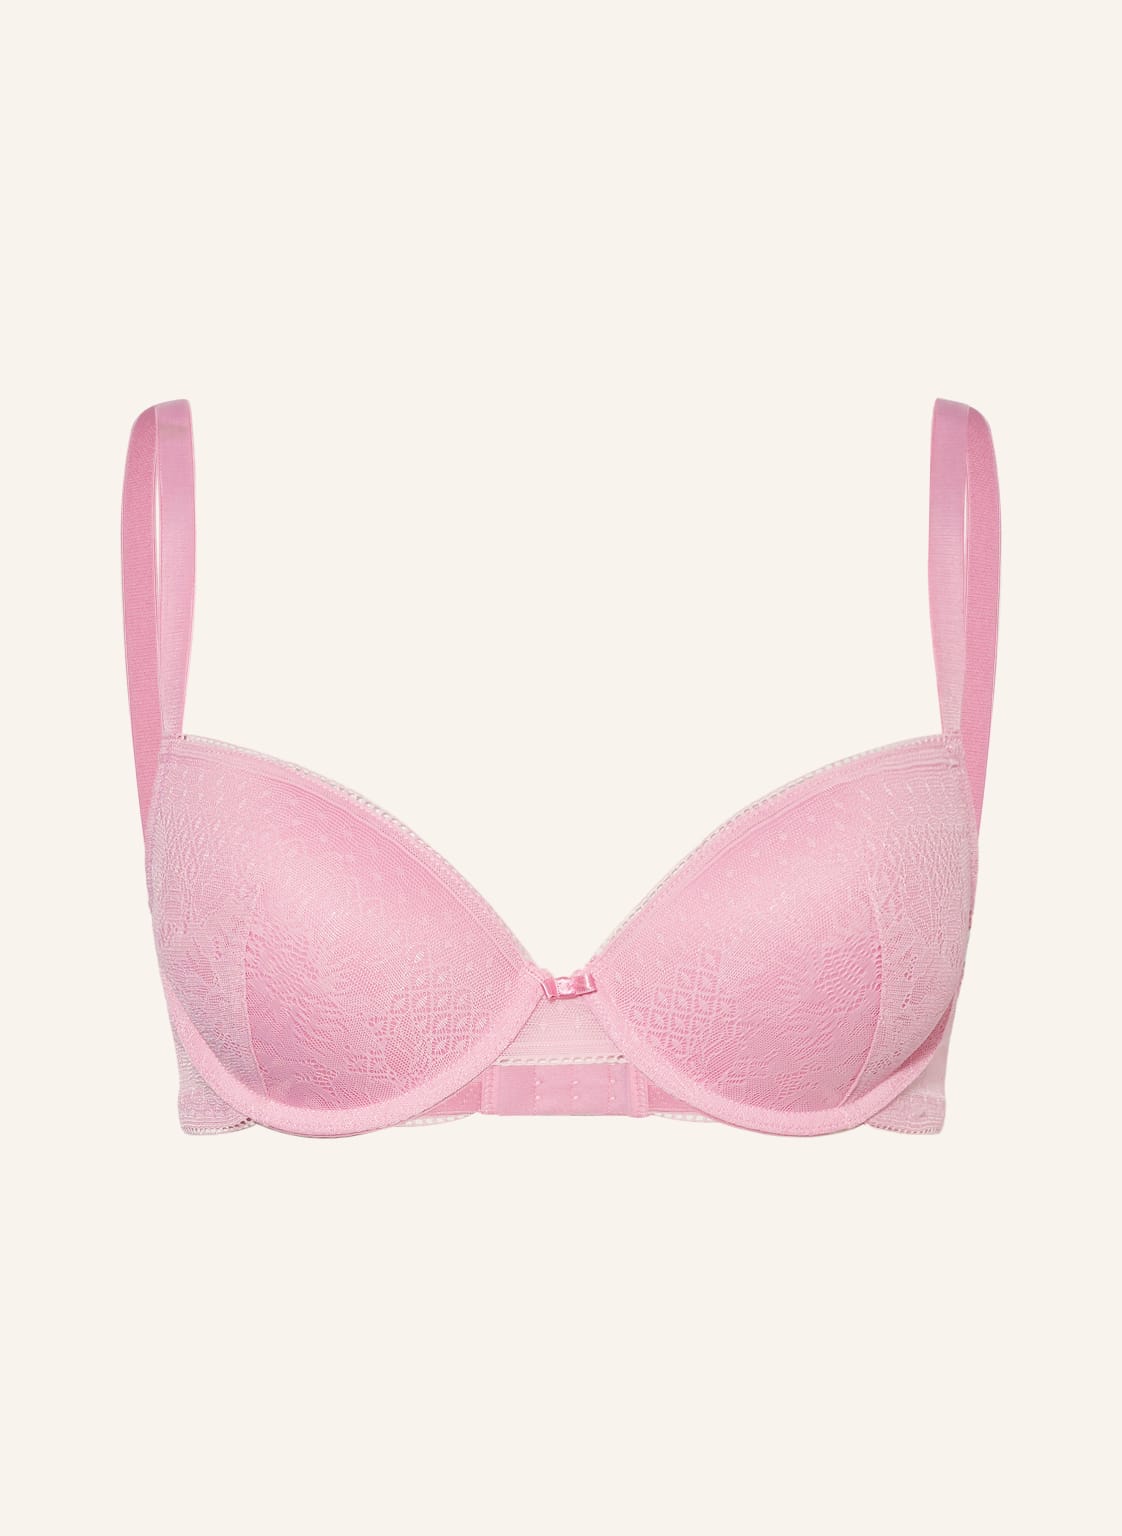 Darling Harbour Push-Up-Bh pink von darling harbour